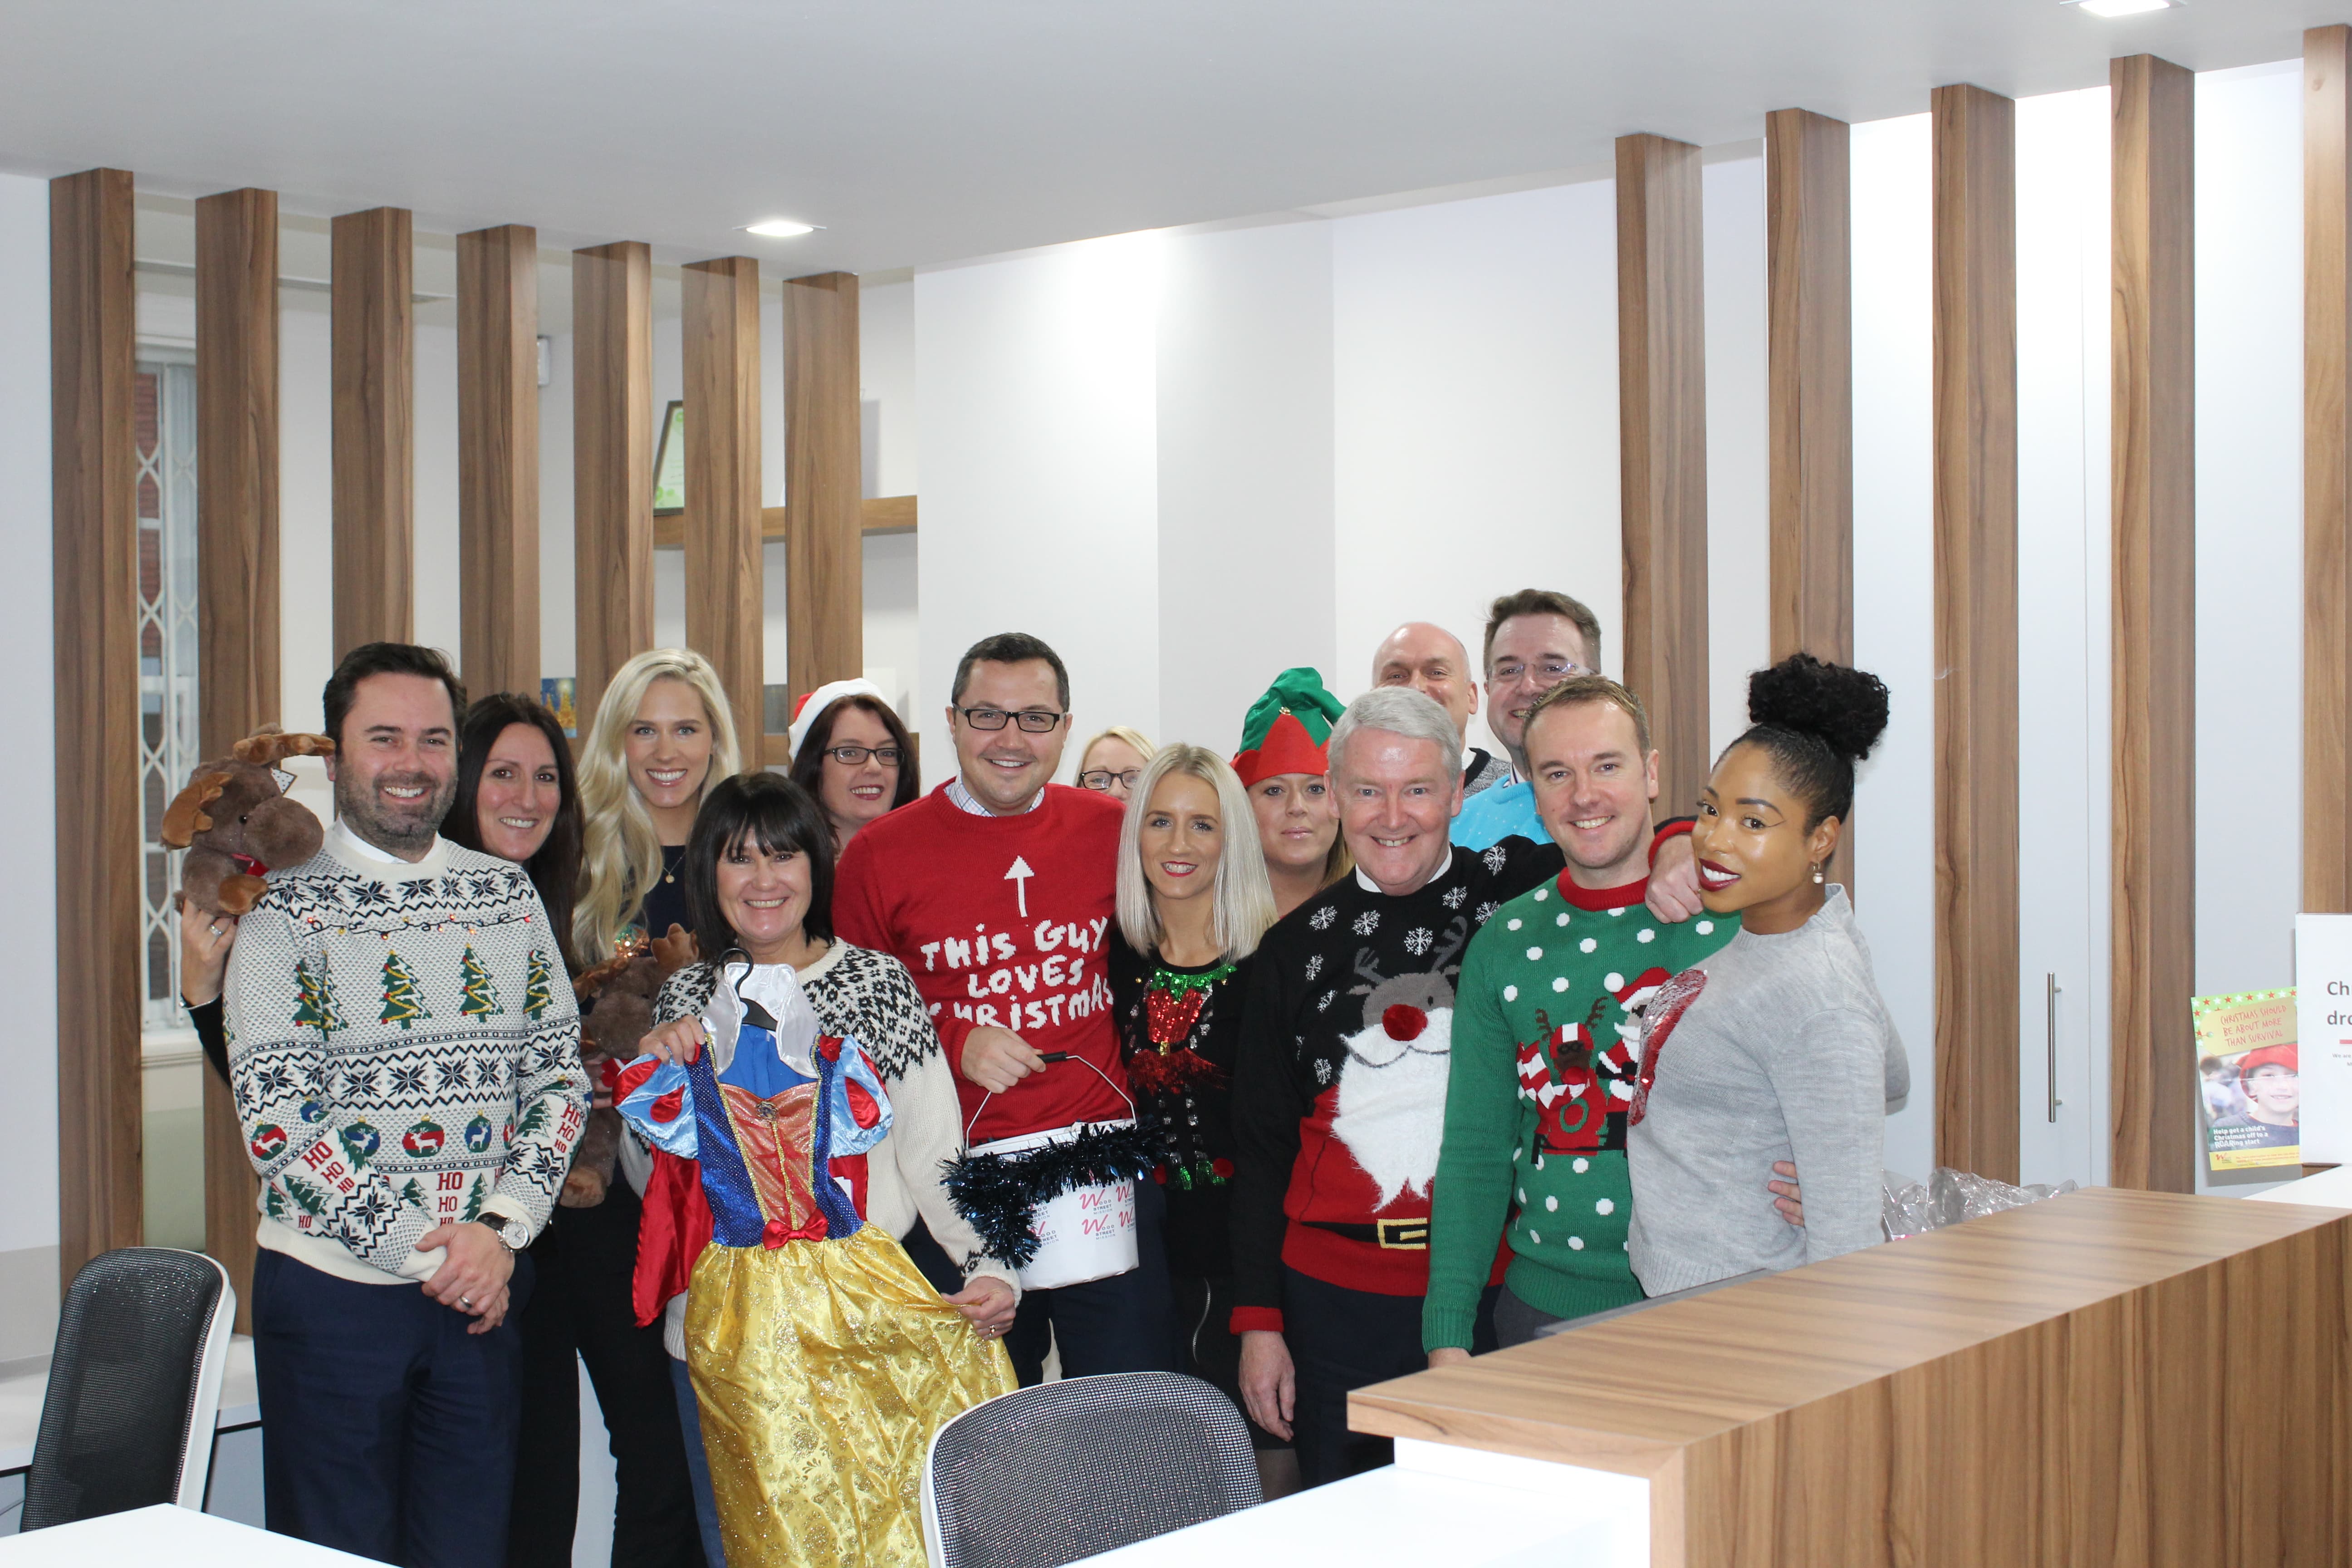 Kings Chambers raises over £3,000 for The Wood Street Mission Christmas Appeal